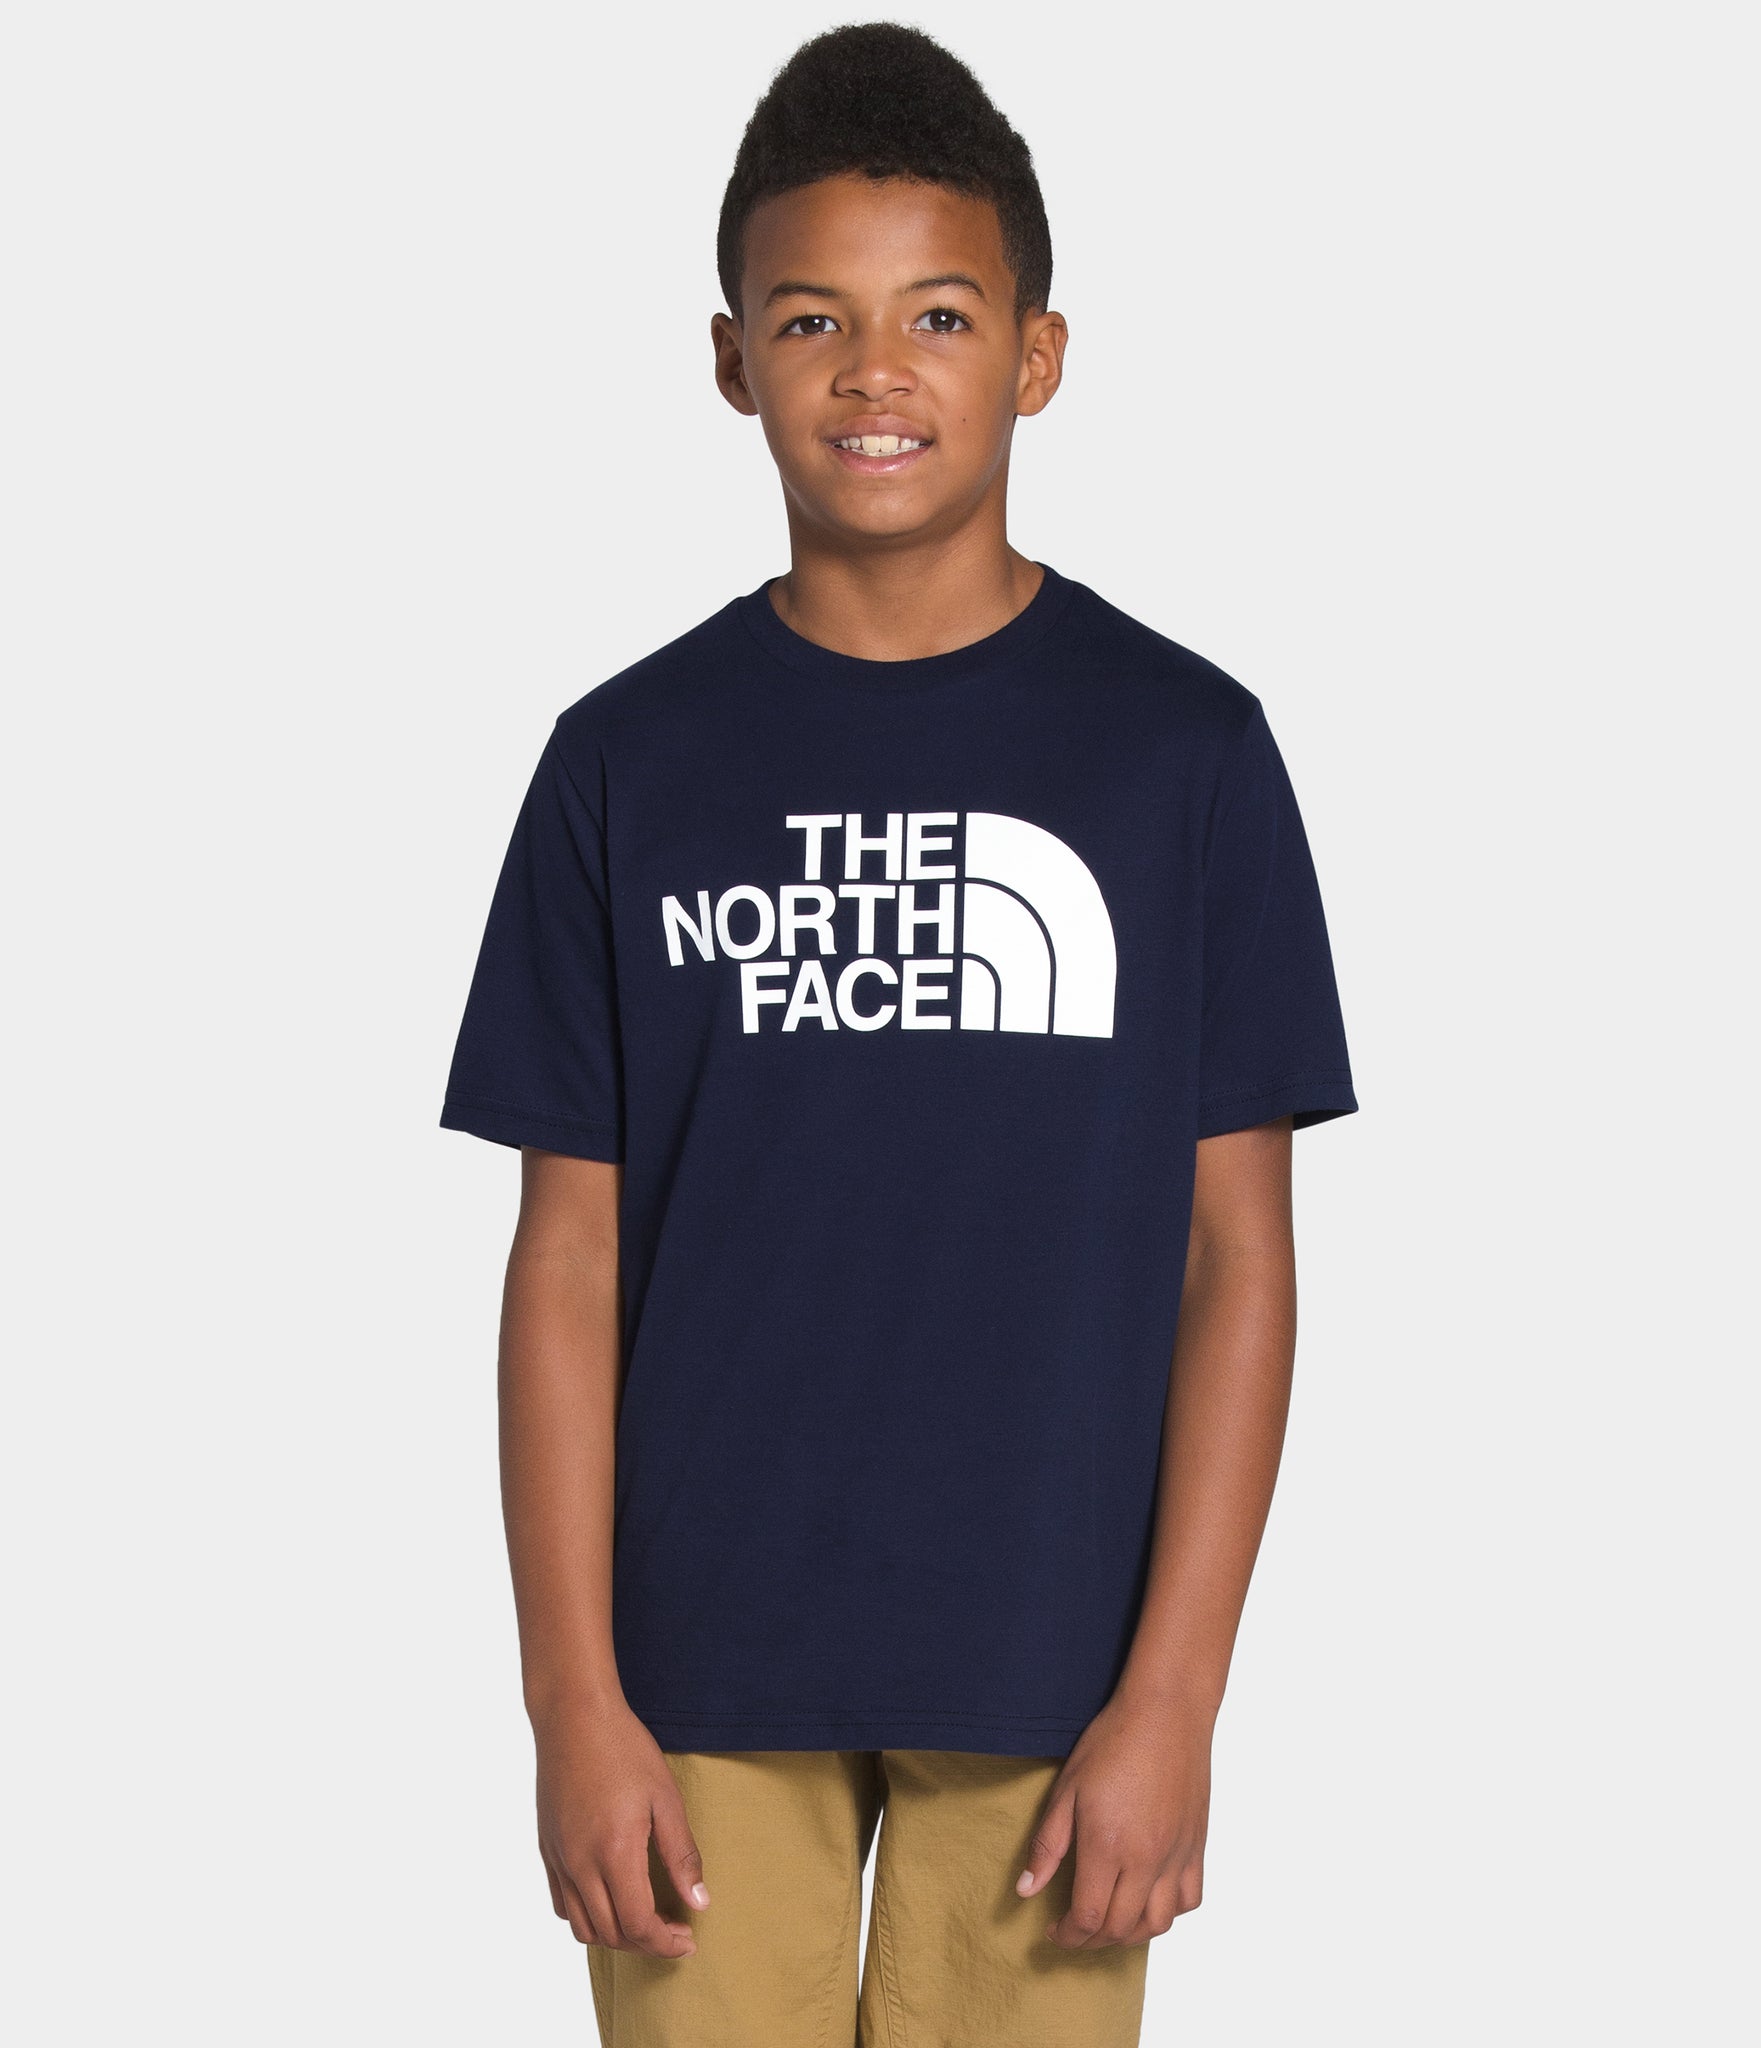 The North Face S/S Half Dome Tee - Boys 